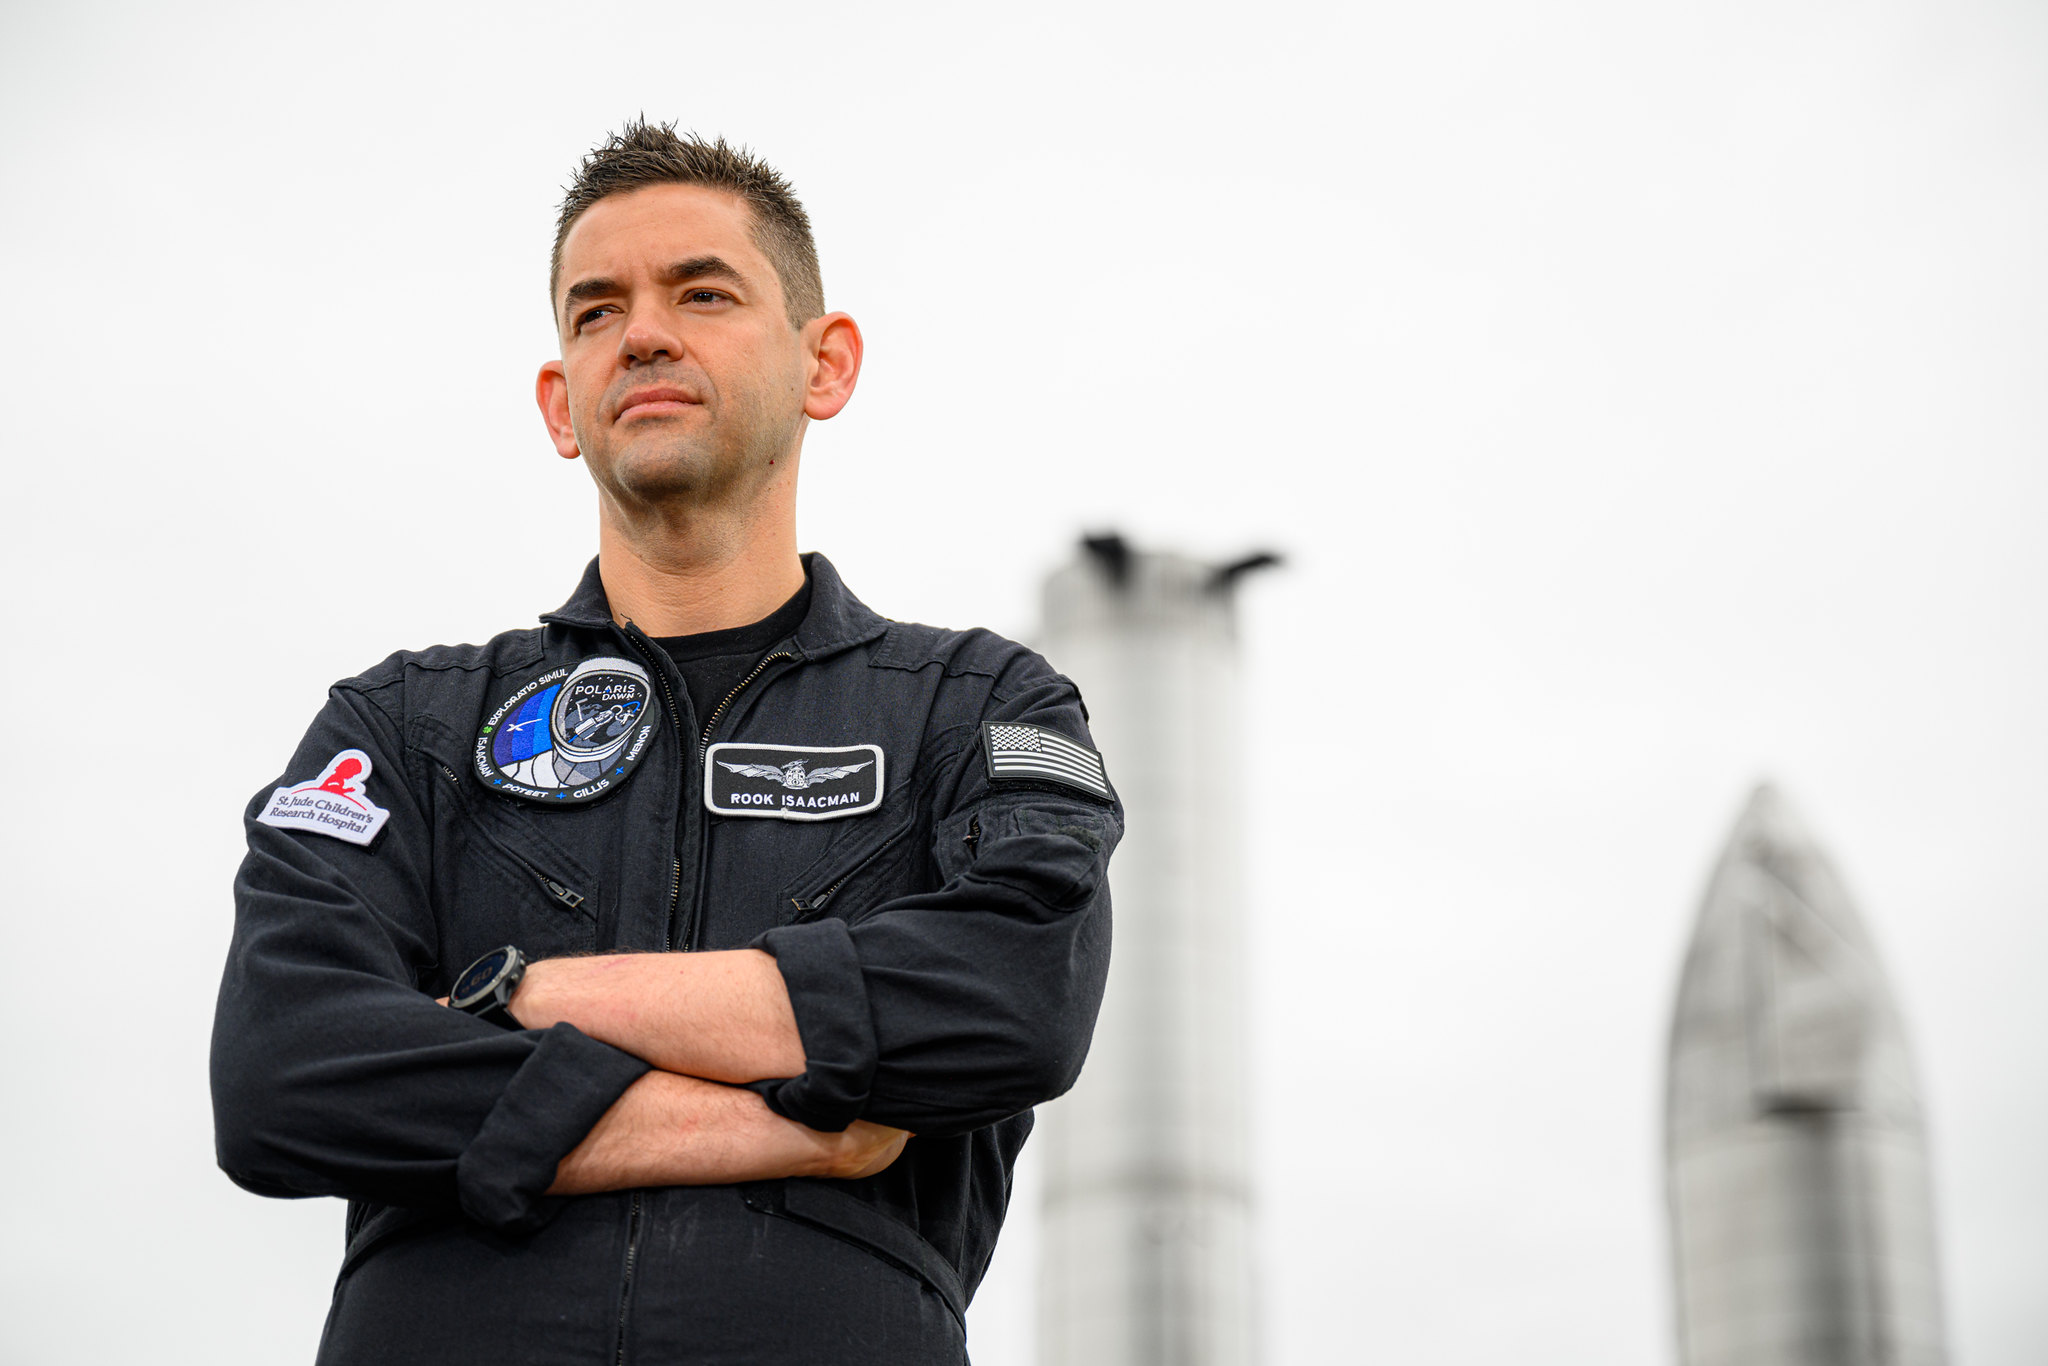 Billionaire Jared Isaacman will command the Polaris Dawn civilian astronaut mission aboard the SpaceX Dragon spacecraft in late 2022.